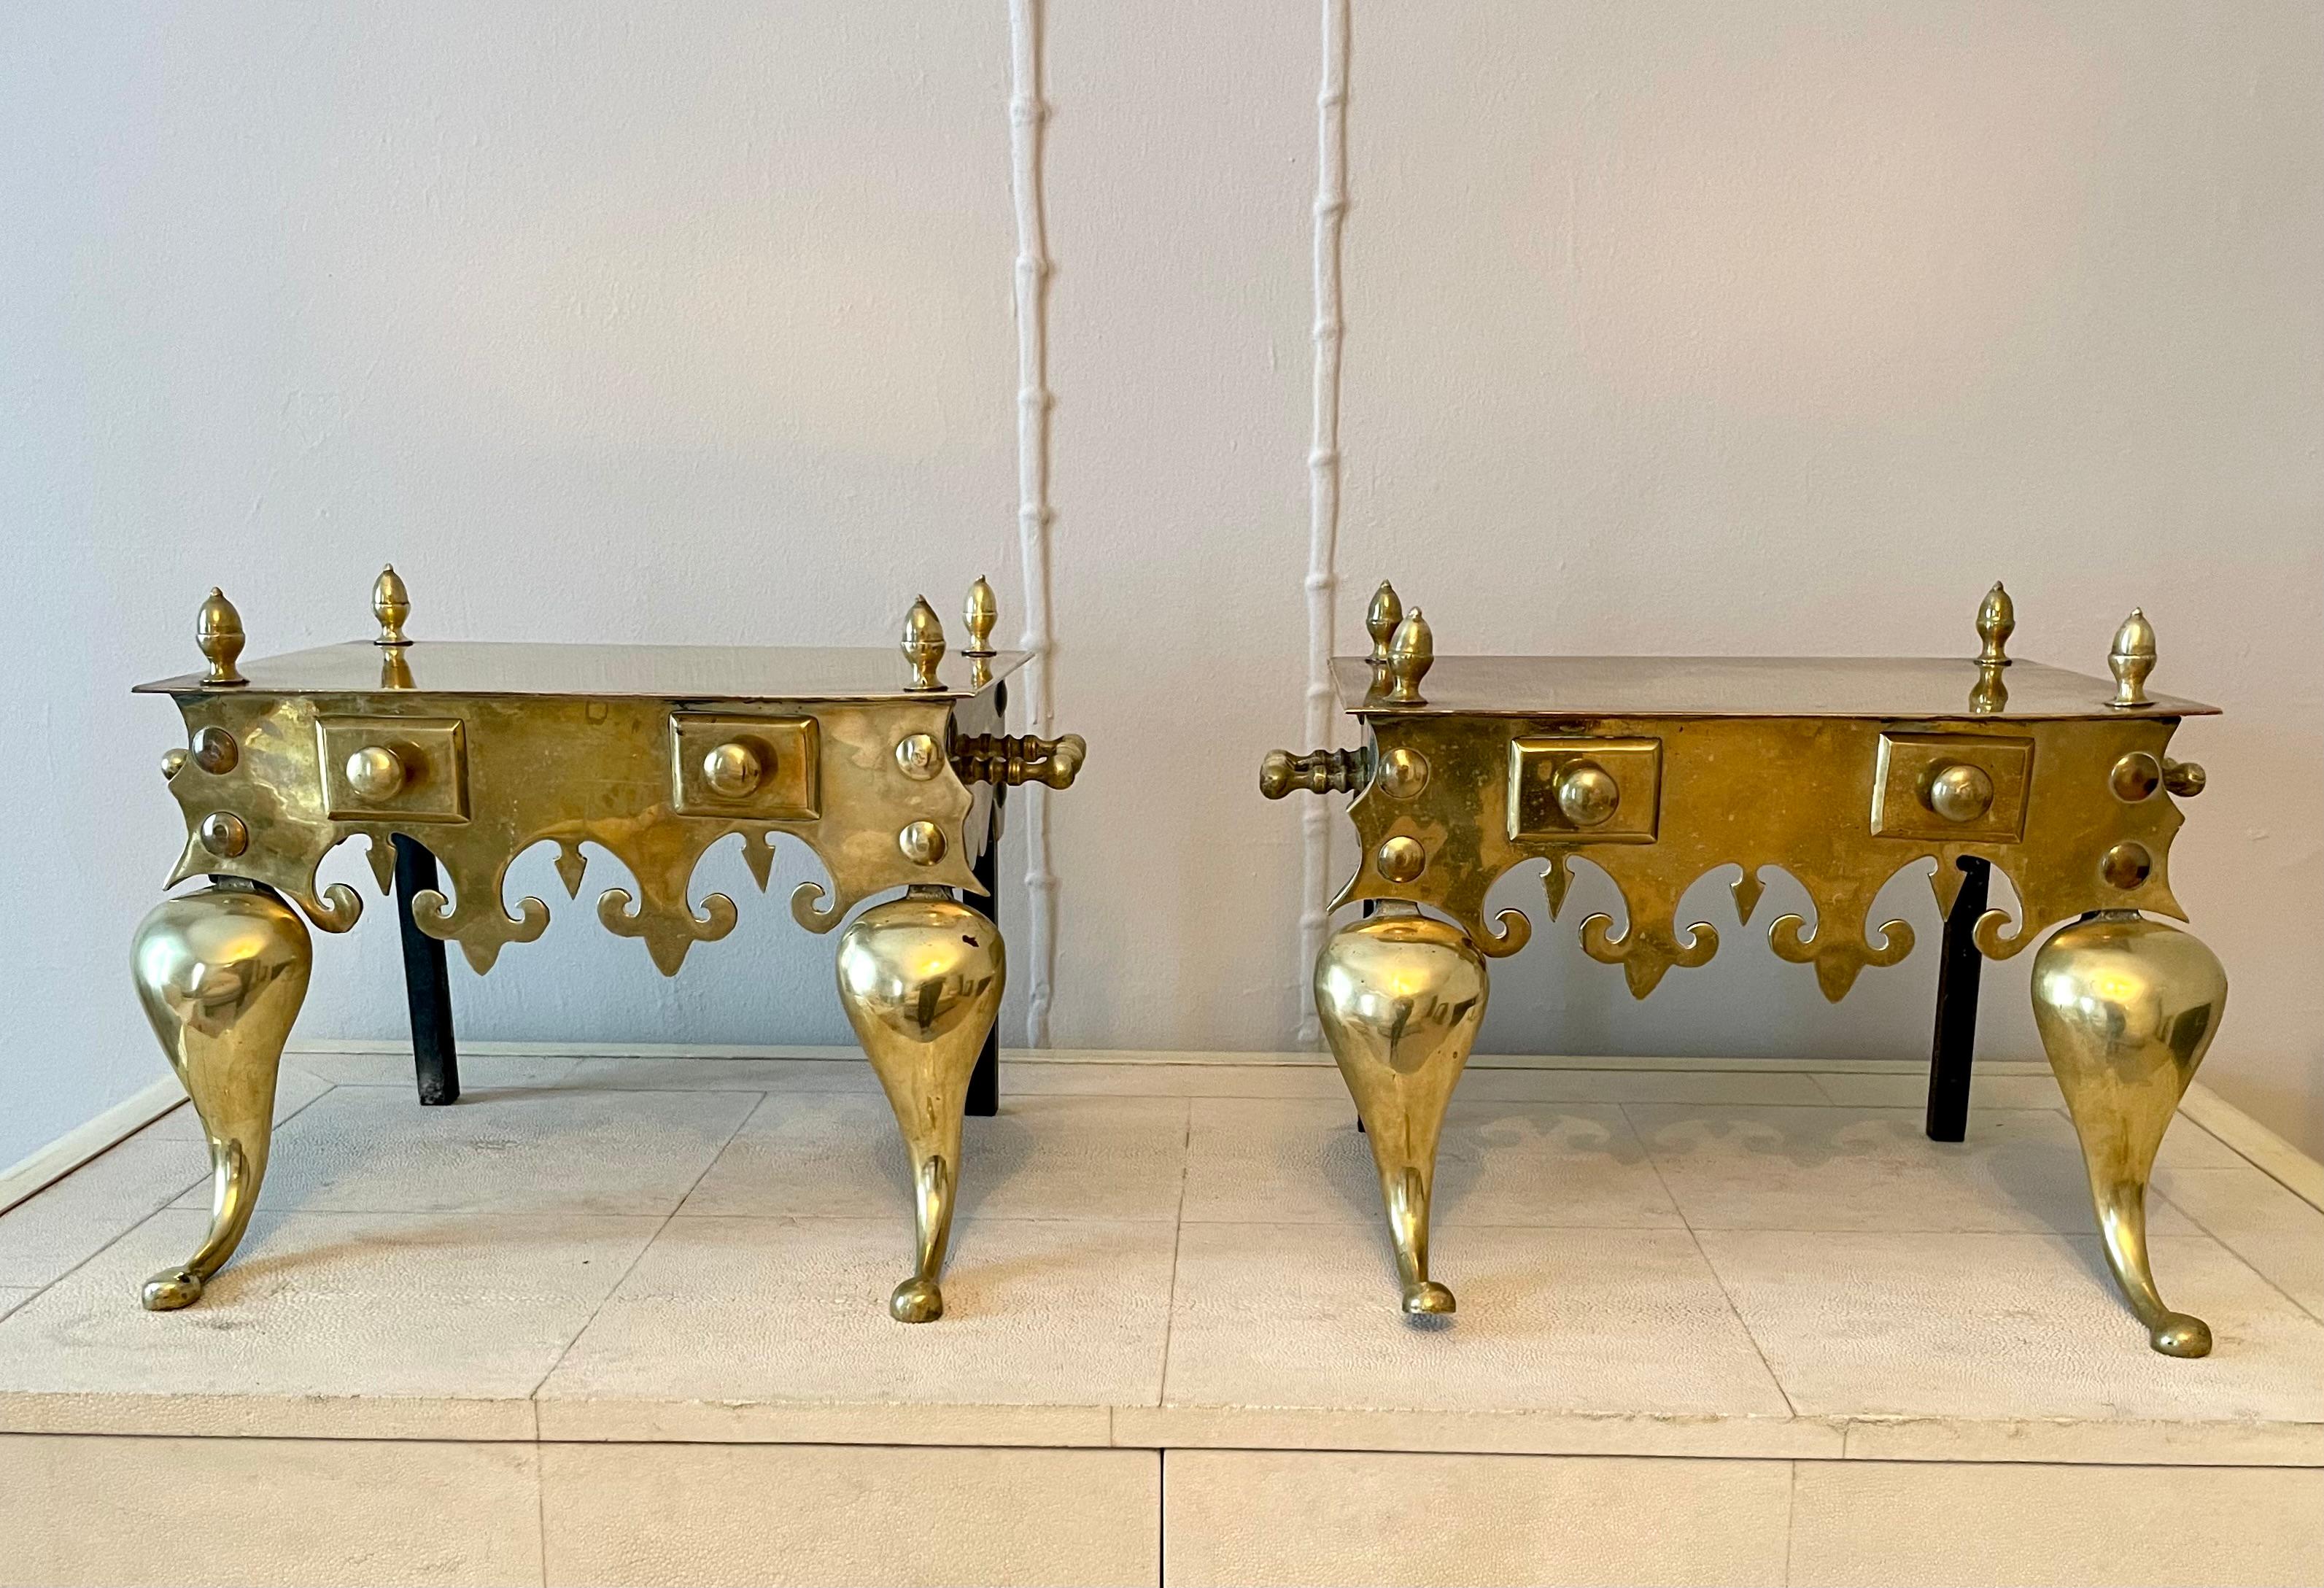 The footman was used to keep pots warm in the fireplace. 

Pair of Victorian brass footman stools with shaped frieze and decorative knob fixtures. Handles on either side and gorgeous finials on all for corners.

The excellent craftsmanship and